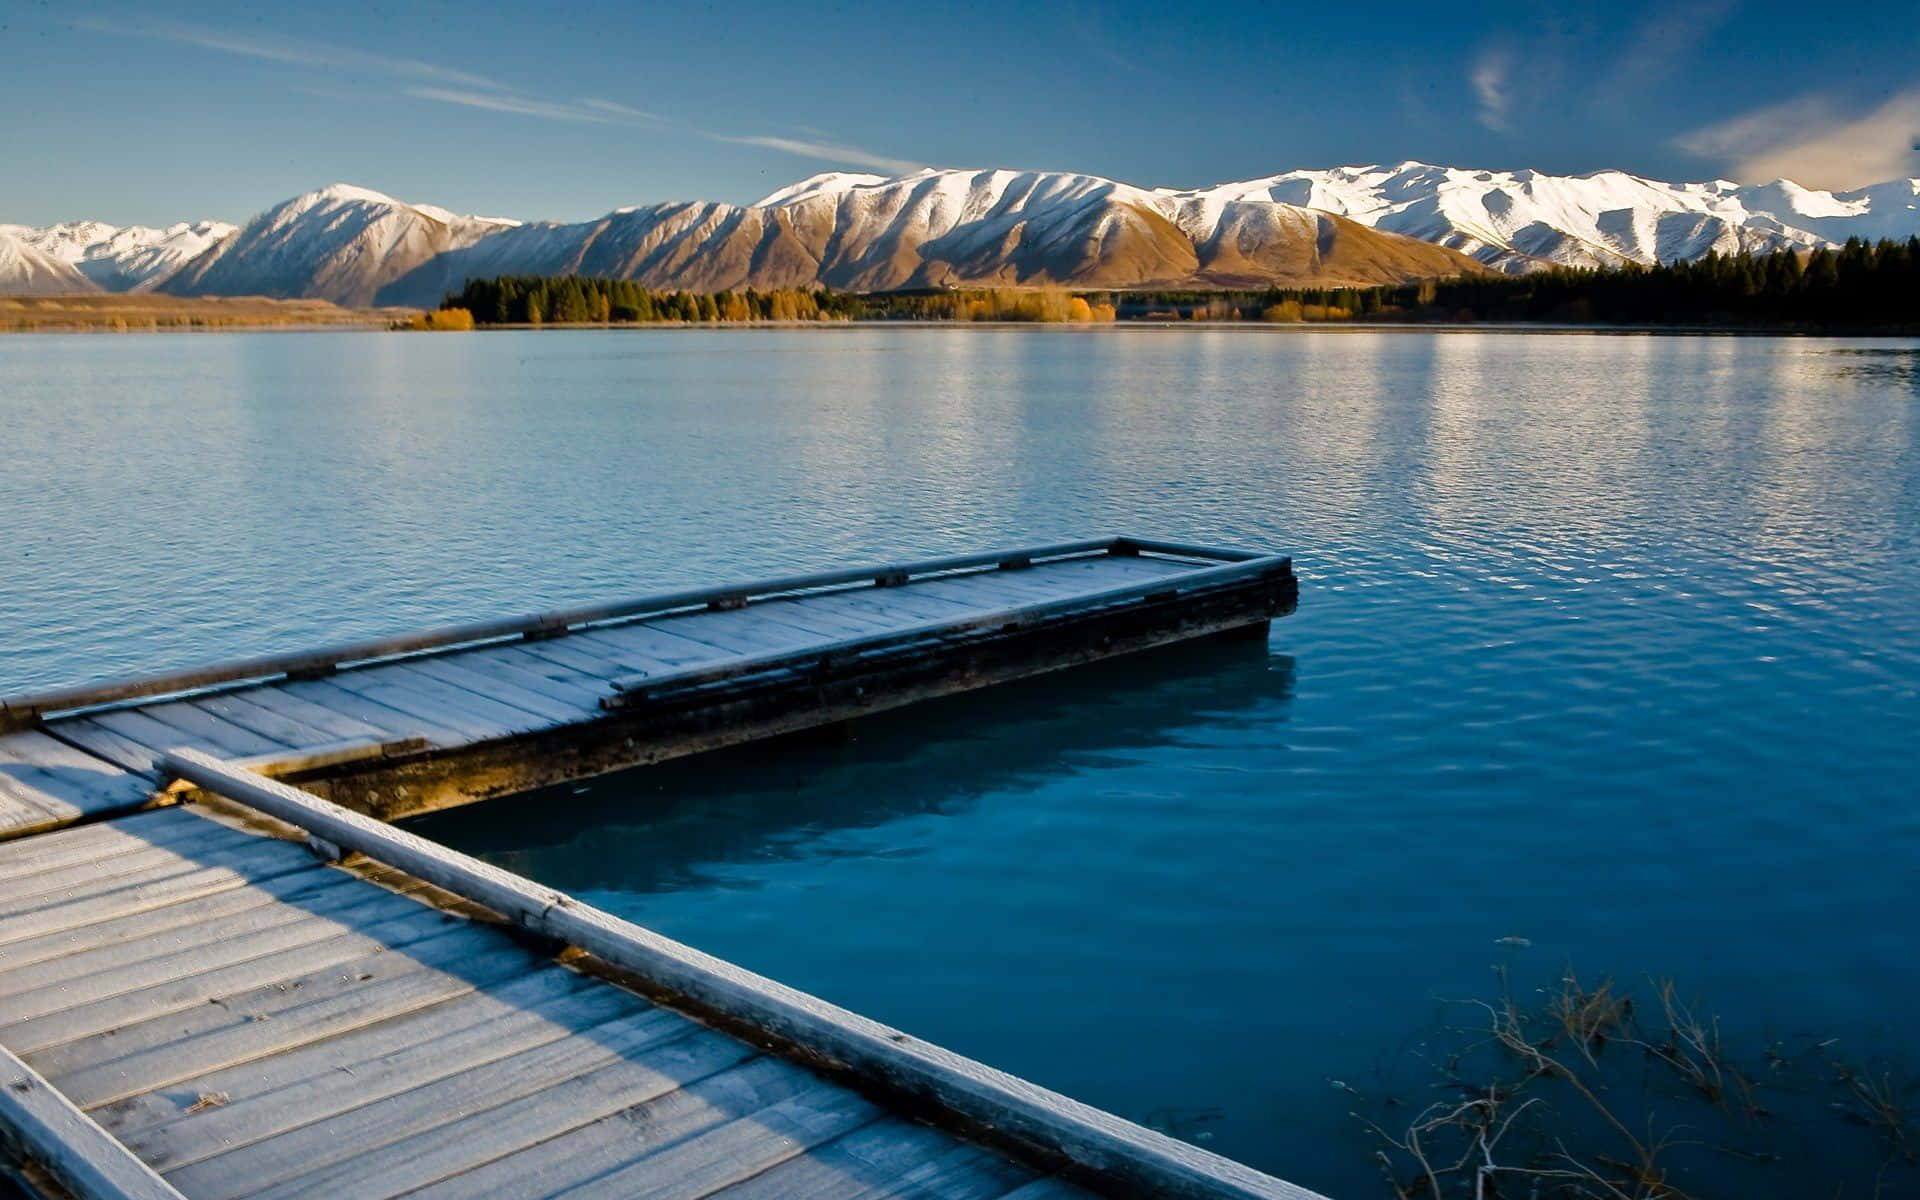 A Wooden Dock With Mountains In The Background